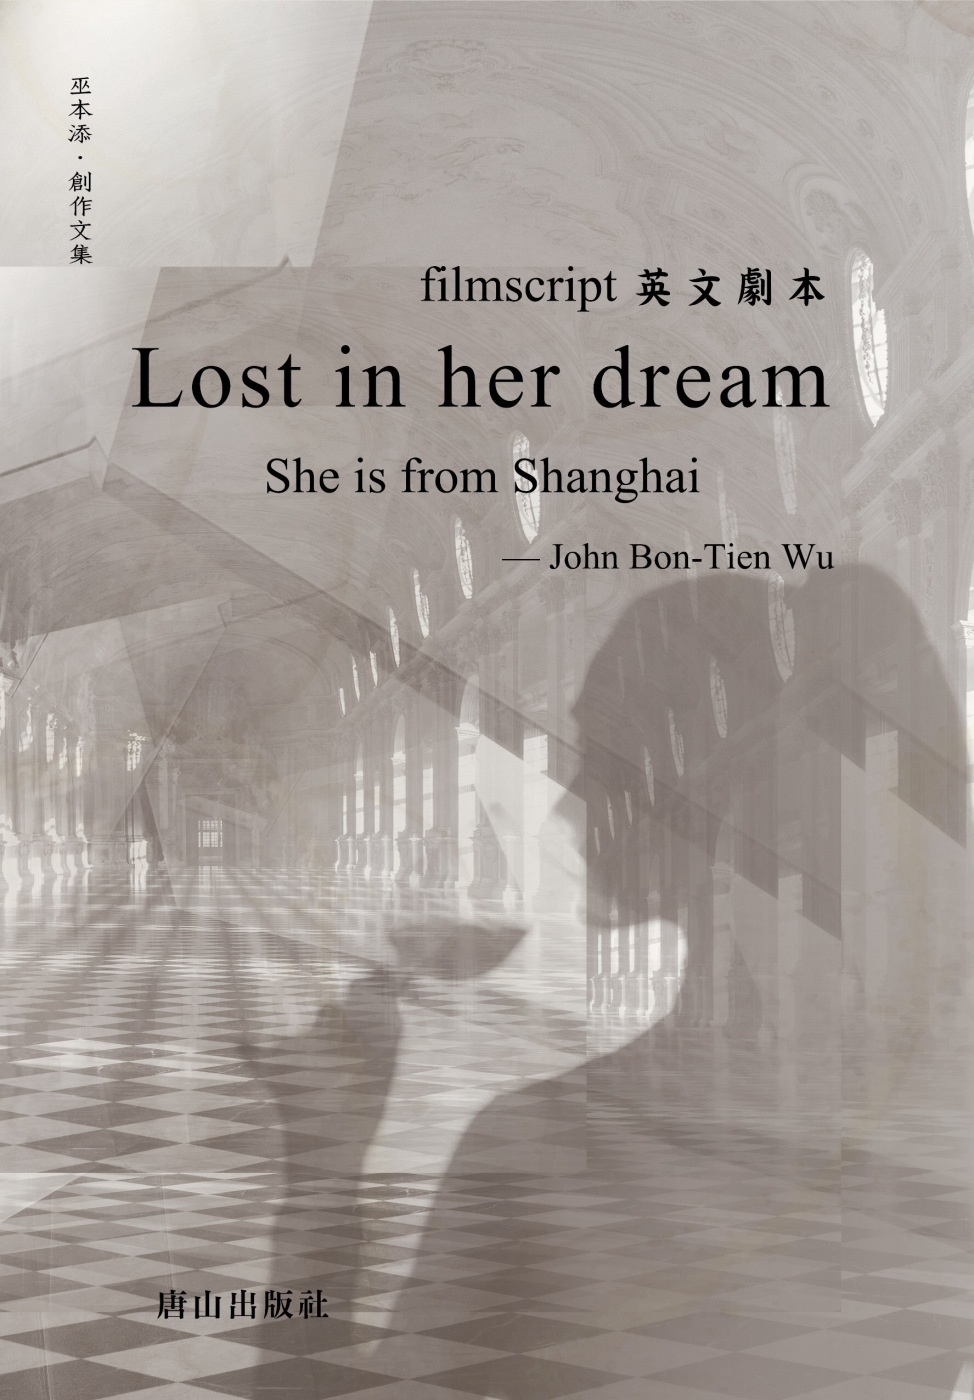 Lost in her dream：She is from Shanghai